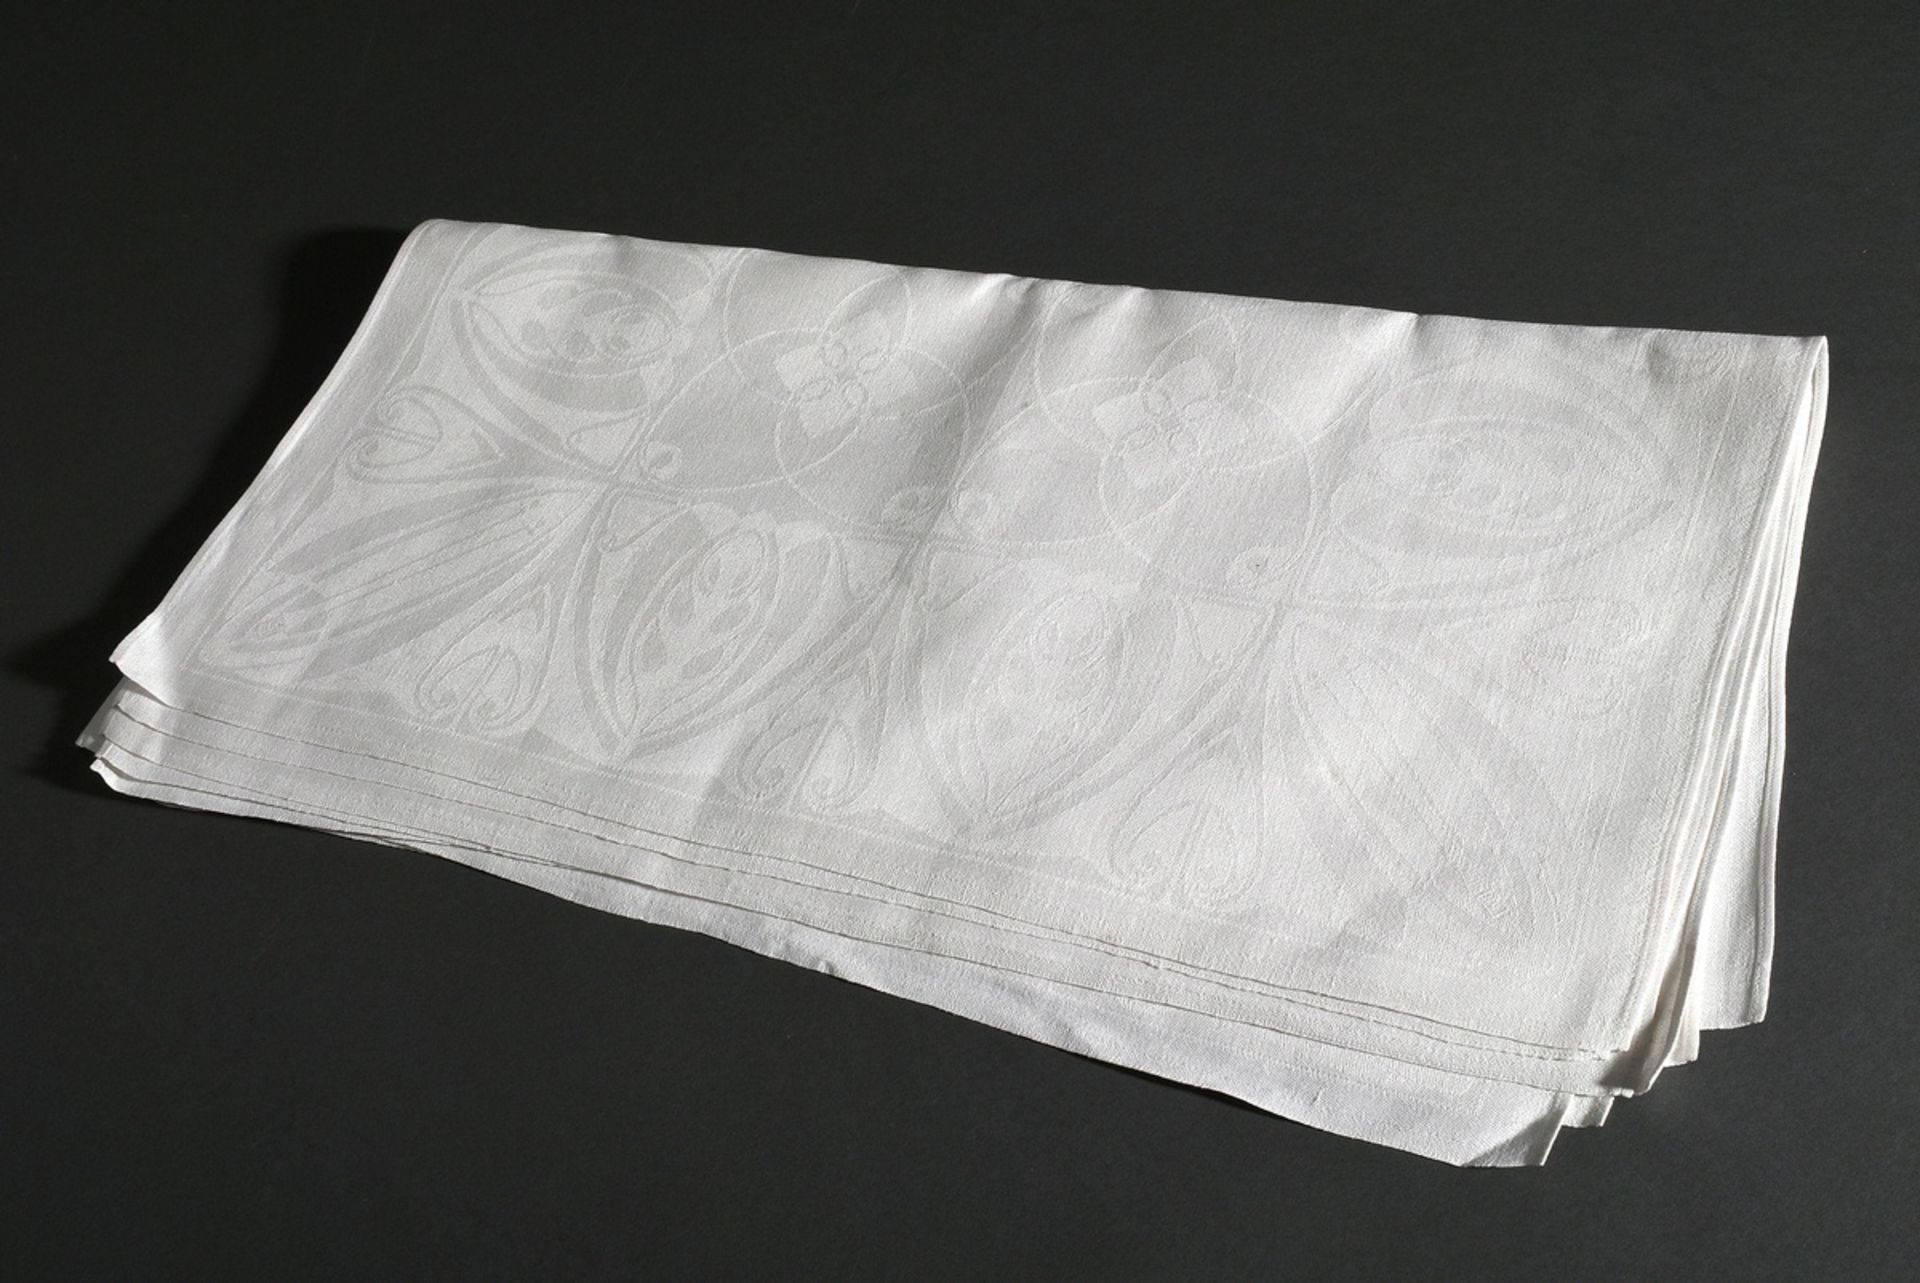 Behrens, Peter (1868-1940), 6 napkins, linen damask, design c. 1901, probably executed by Simon Frä